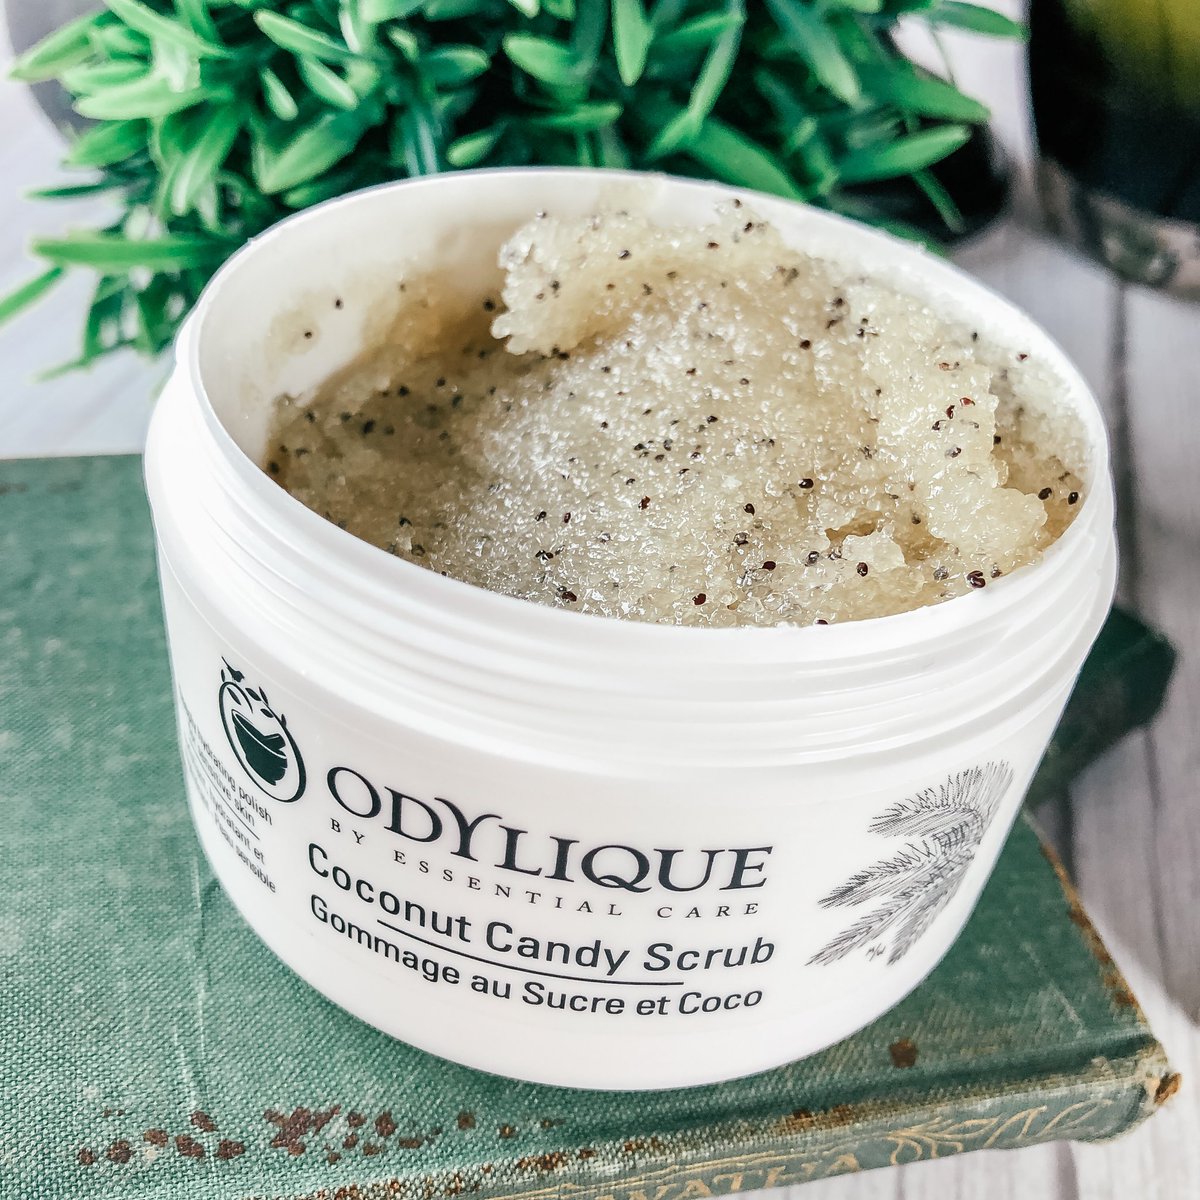 #ad #affiliate | @Odylique's certified organic & 100% natural skincare products. (#CF🐰) Enjoy a 20% discount using code BOXNIP. Code is limited to 1 use per customer. bit.ly/33DpLyv @BloggingBabesRT #TRJForBloggers @BloggersHut #TeamBlogger @_TeamBlogger #odylique